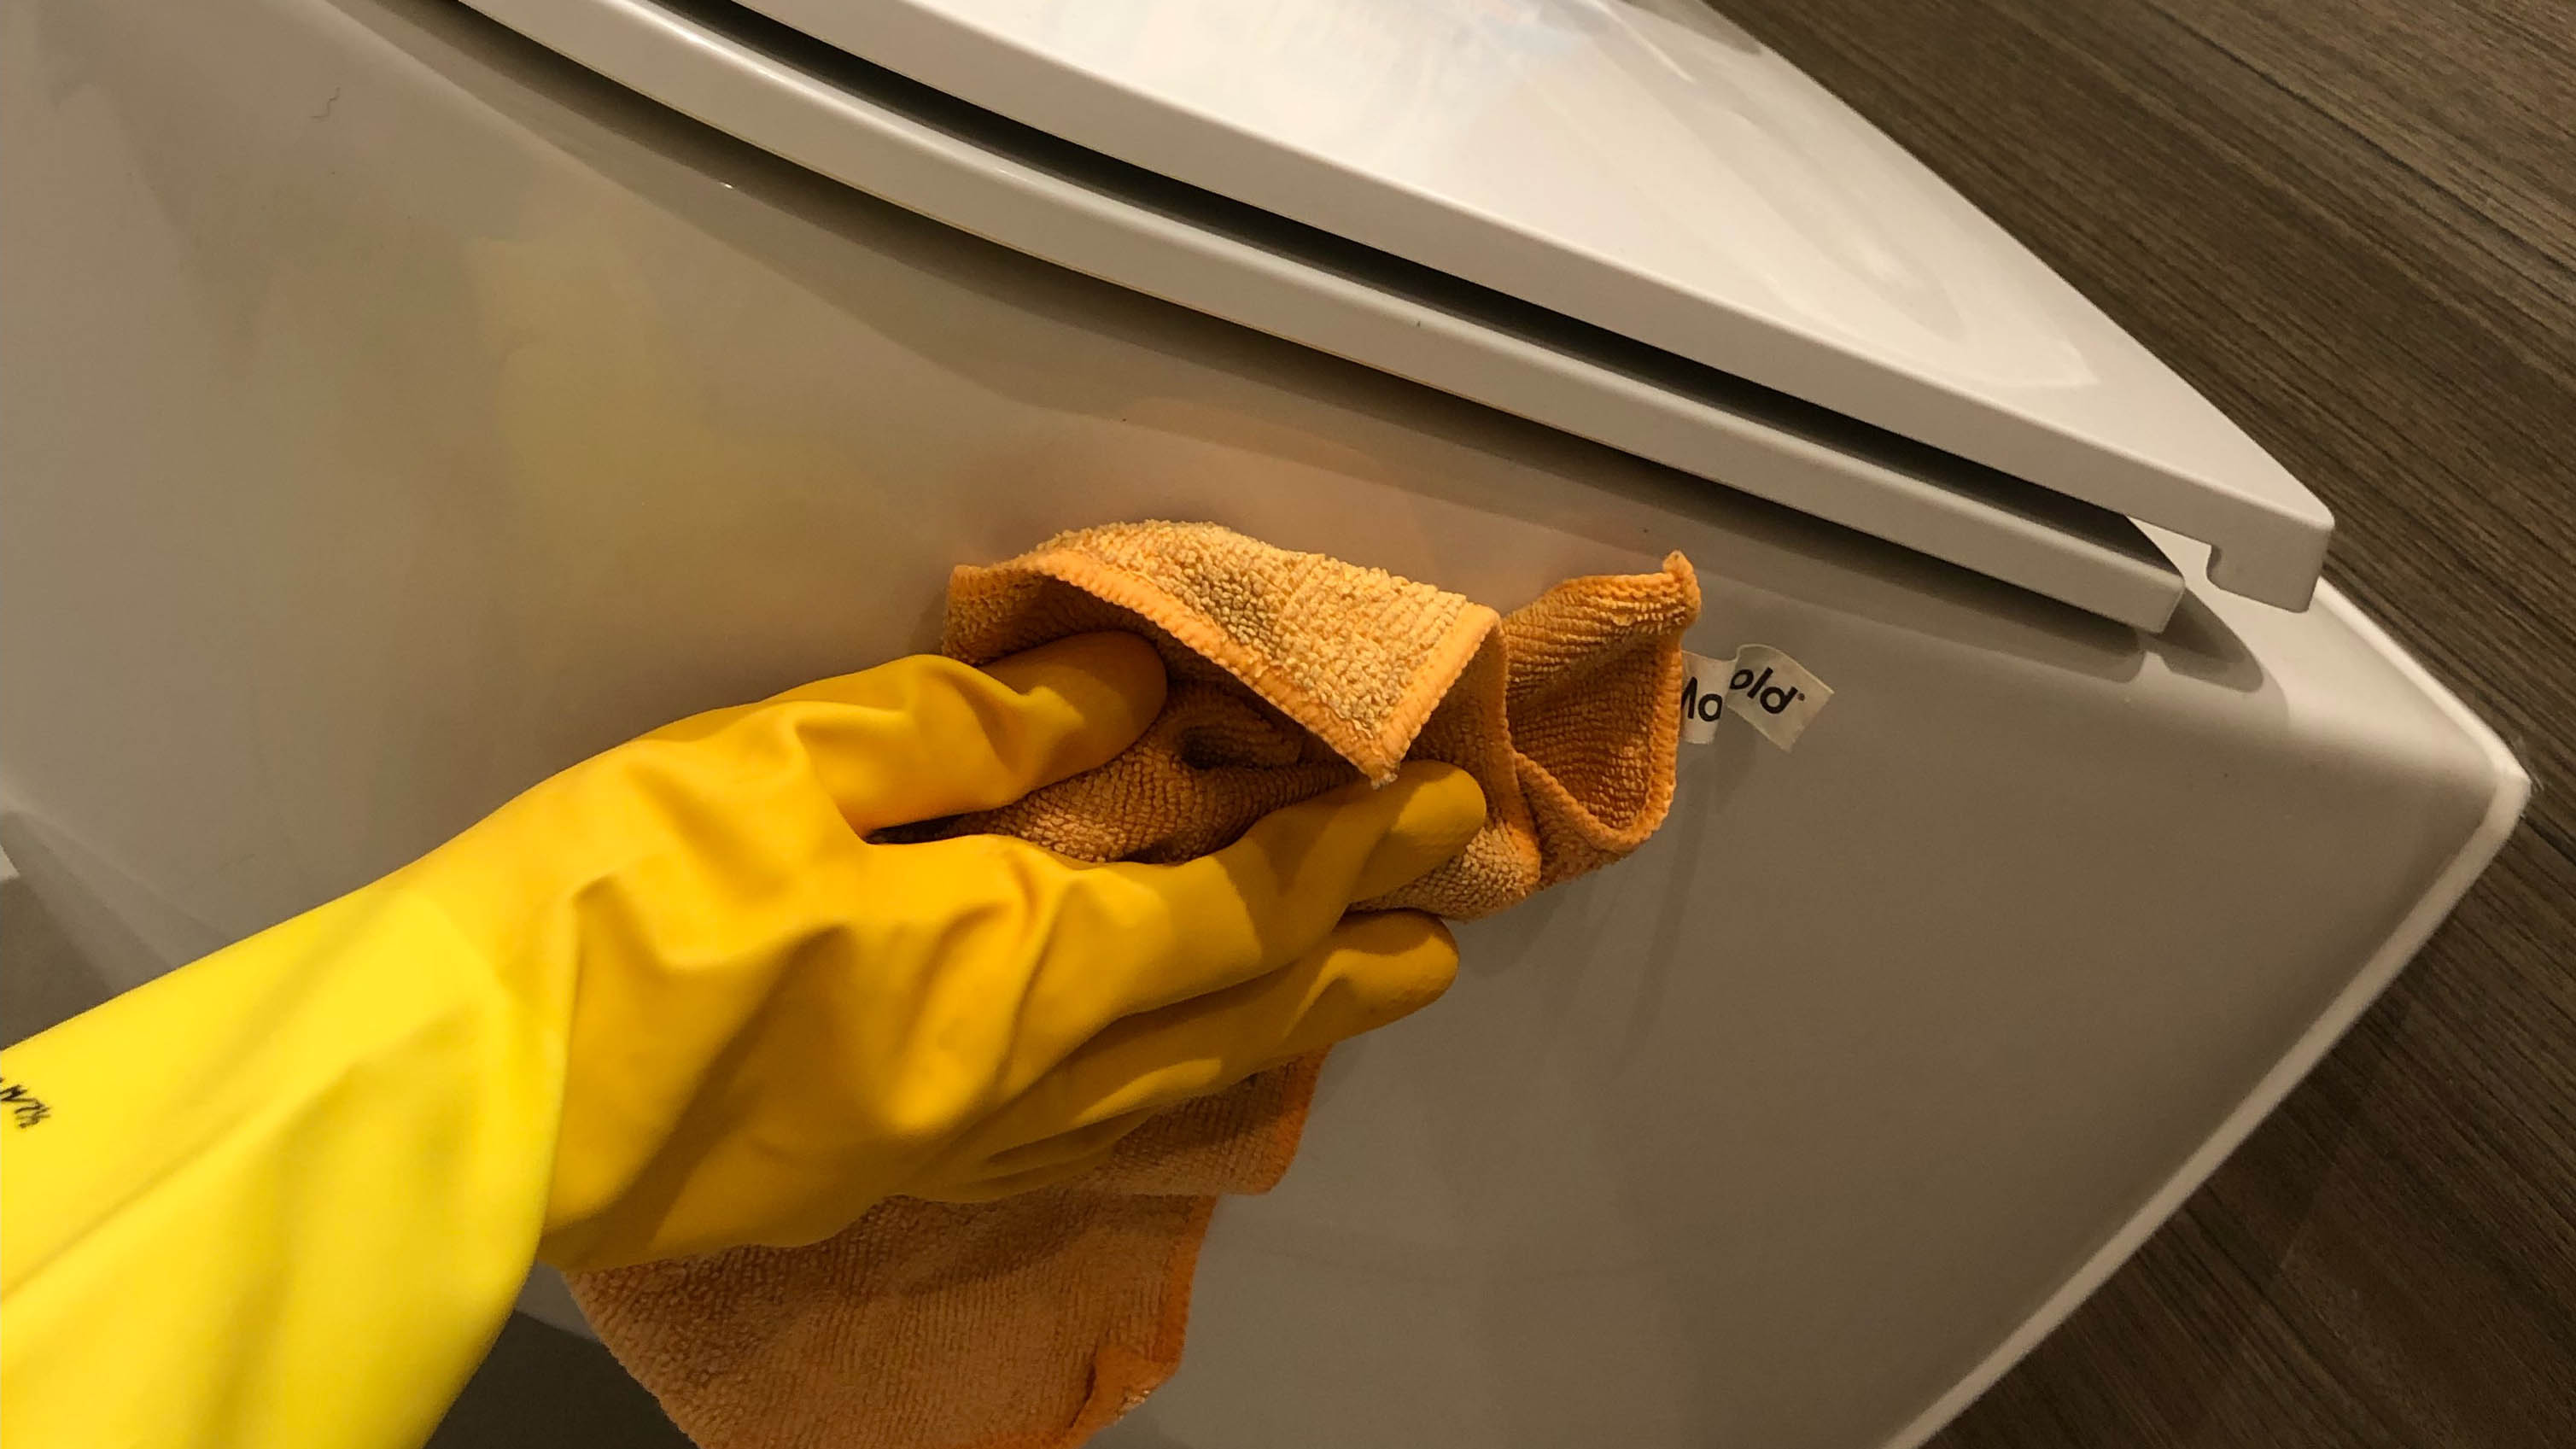 Microfiber cloth used to wear rubber gloves and clean the edges of the toilet